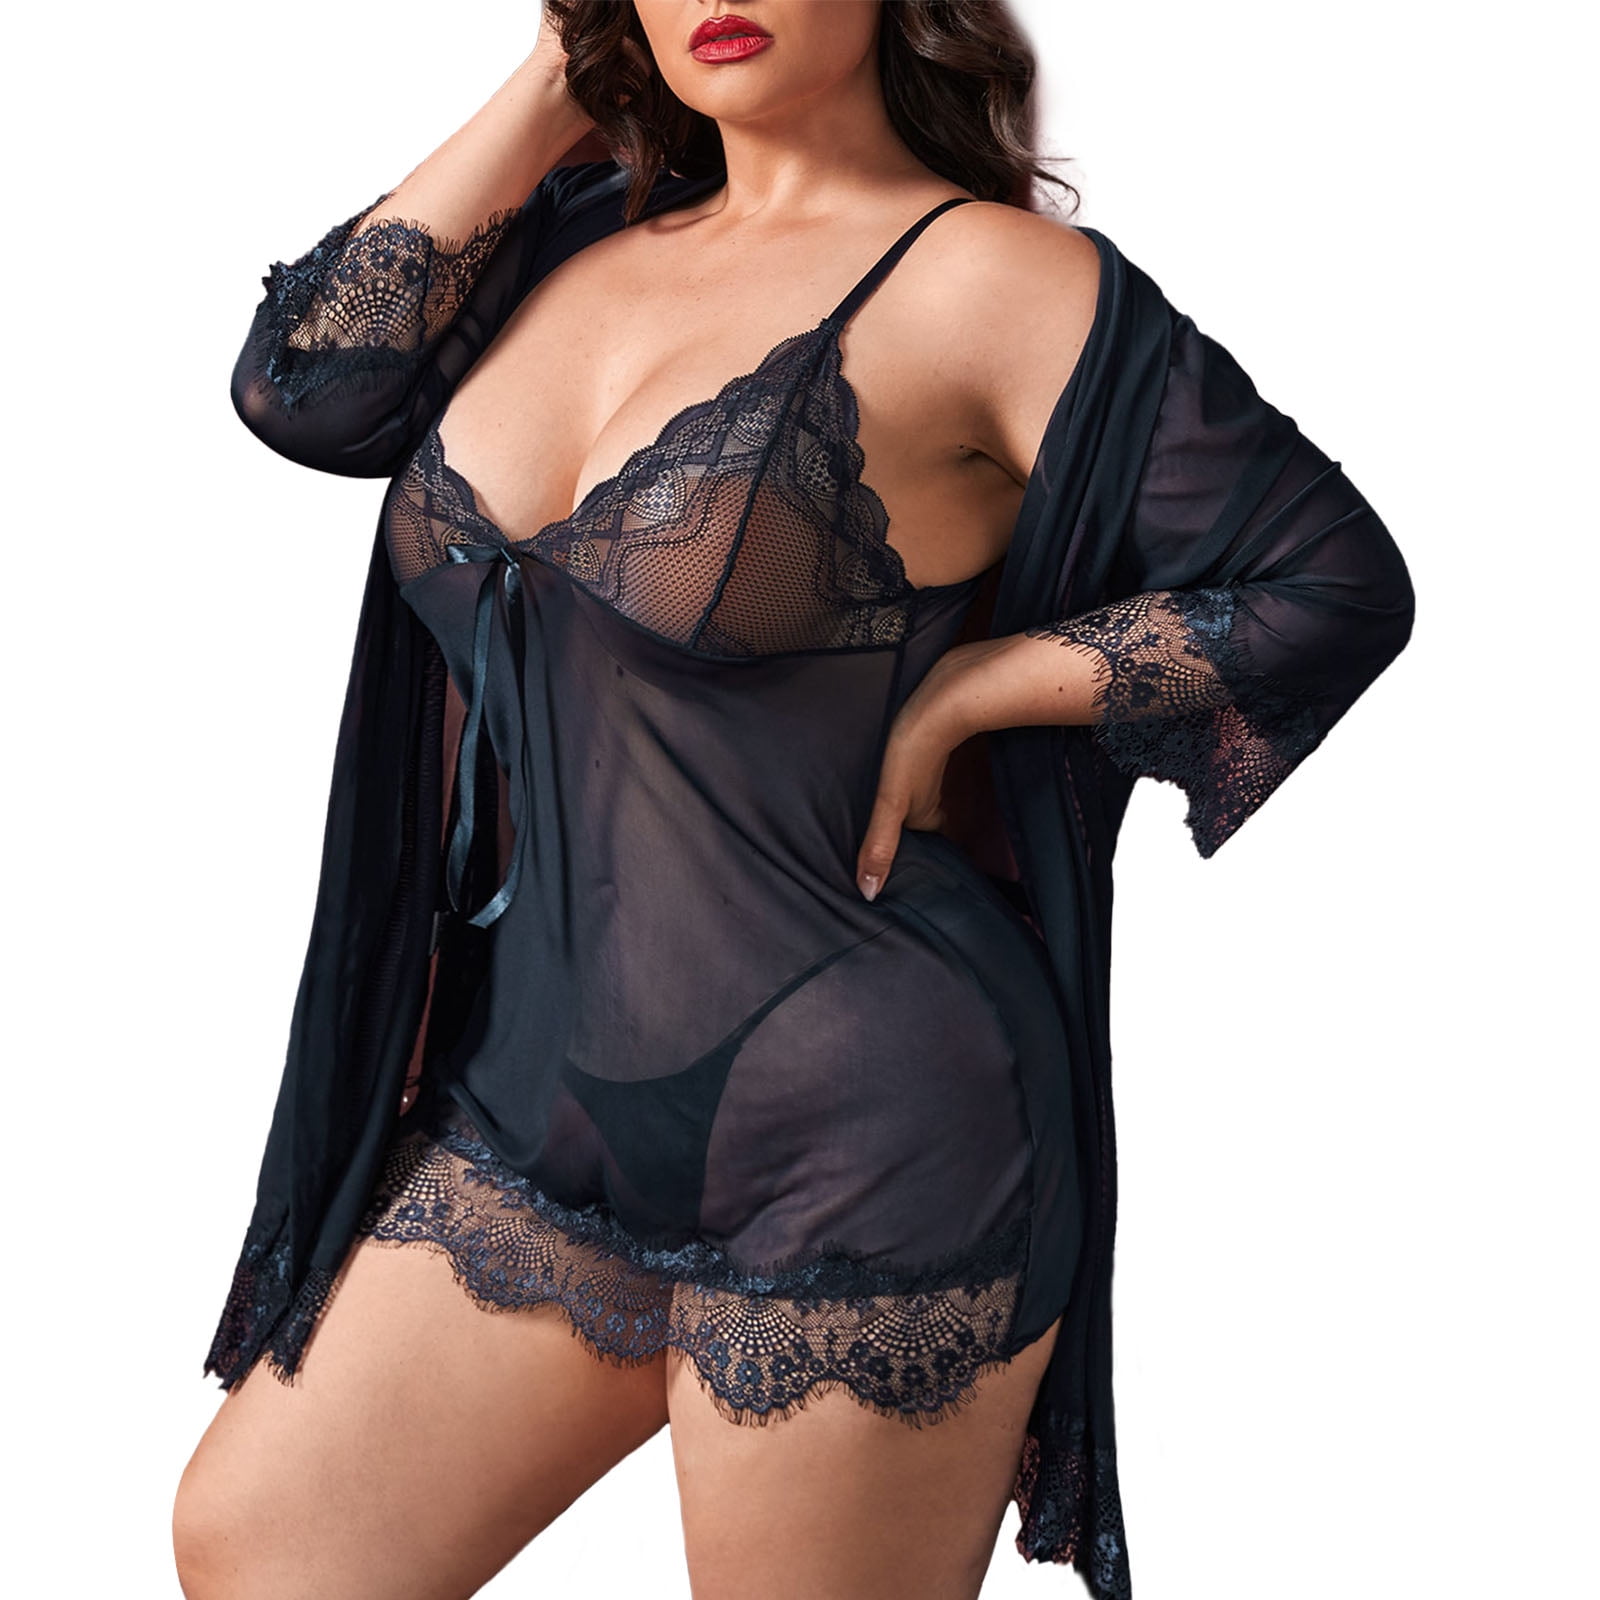 VerPetridure Sexy Lingerie for Women Naughty Plus Size Fashion